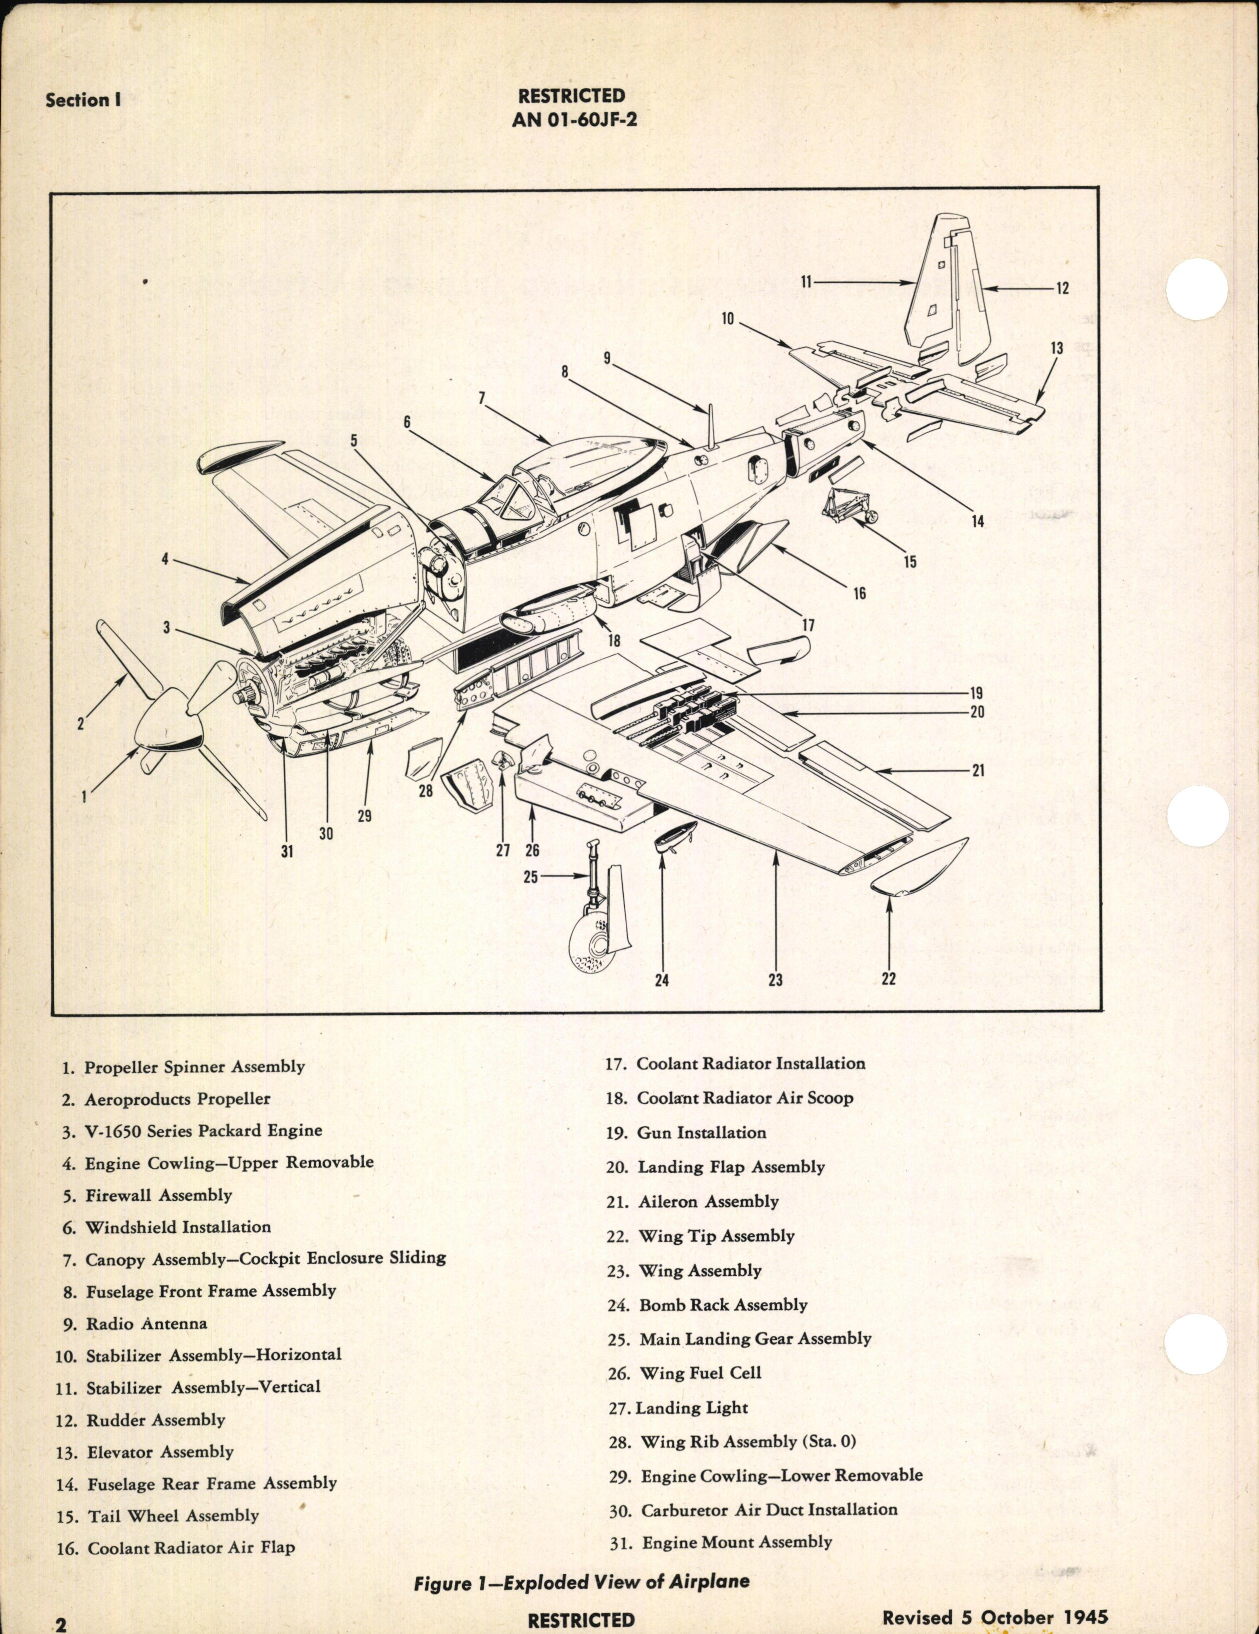 Sample page 8 from AirCorps Library document: Erection and Maintenance Instructions for P-51H-1, -5, and -10